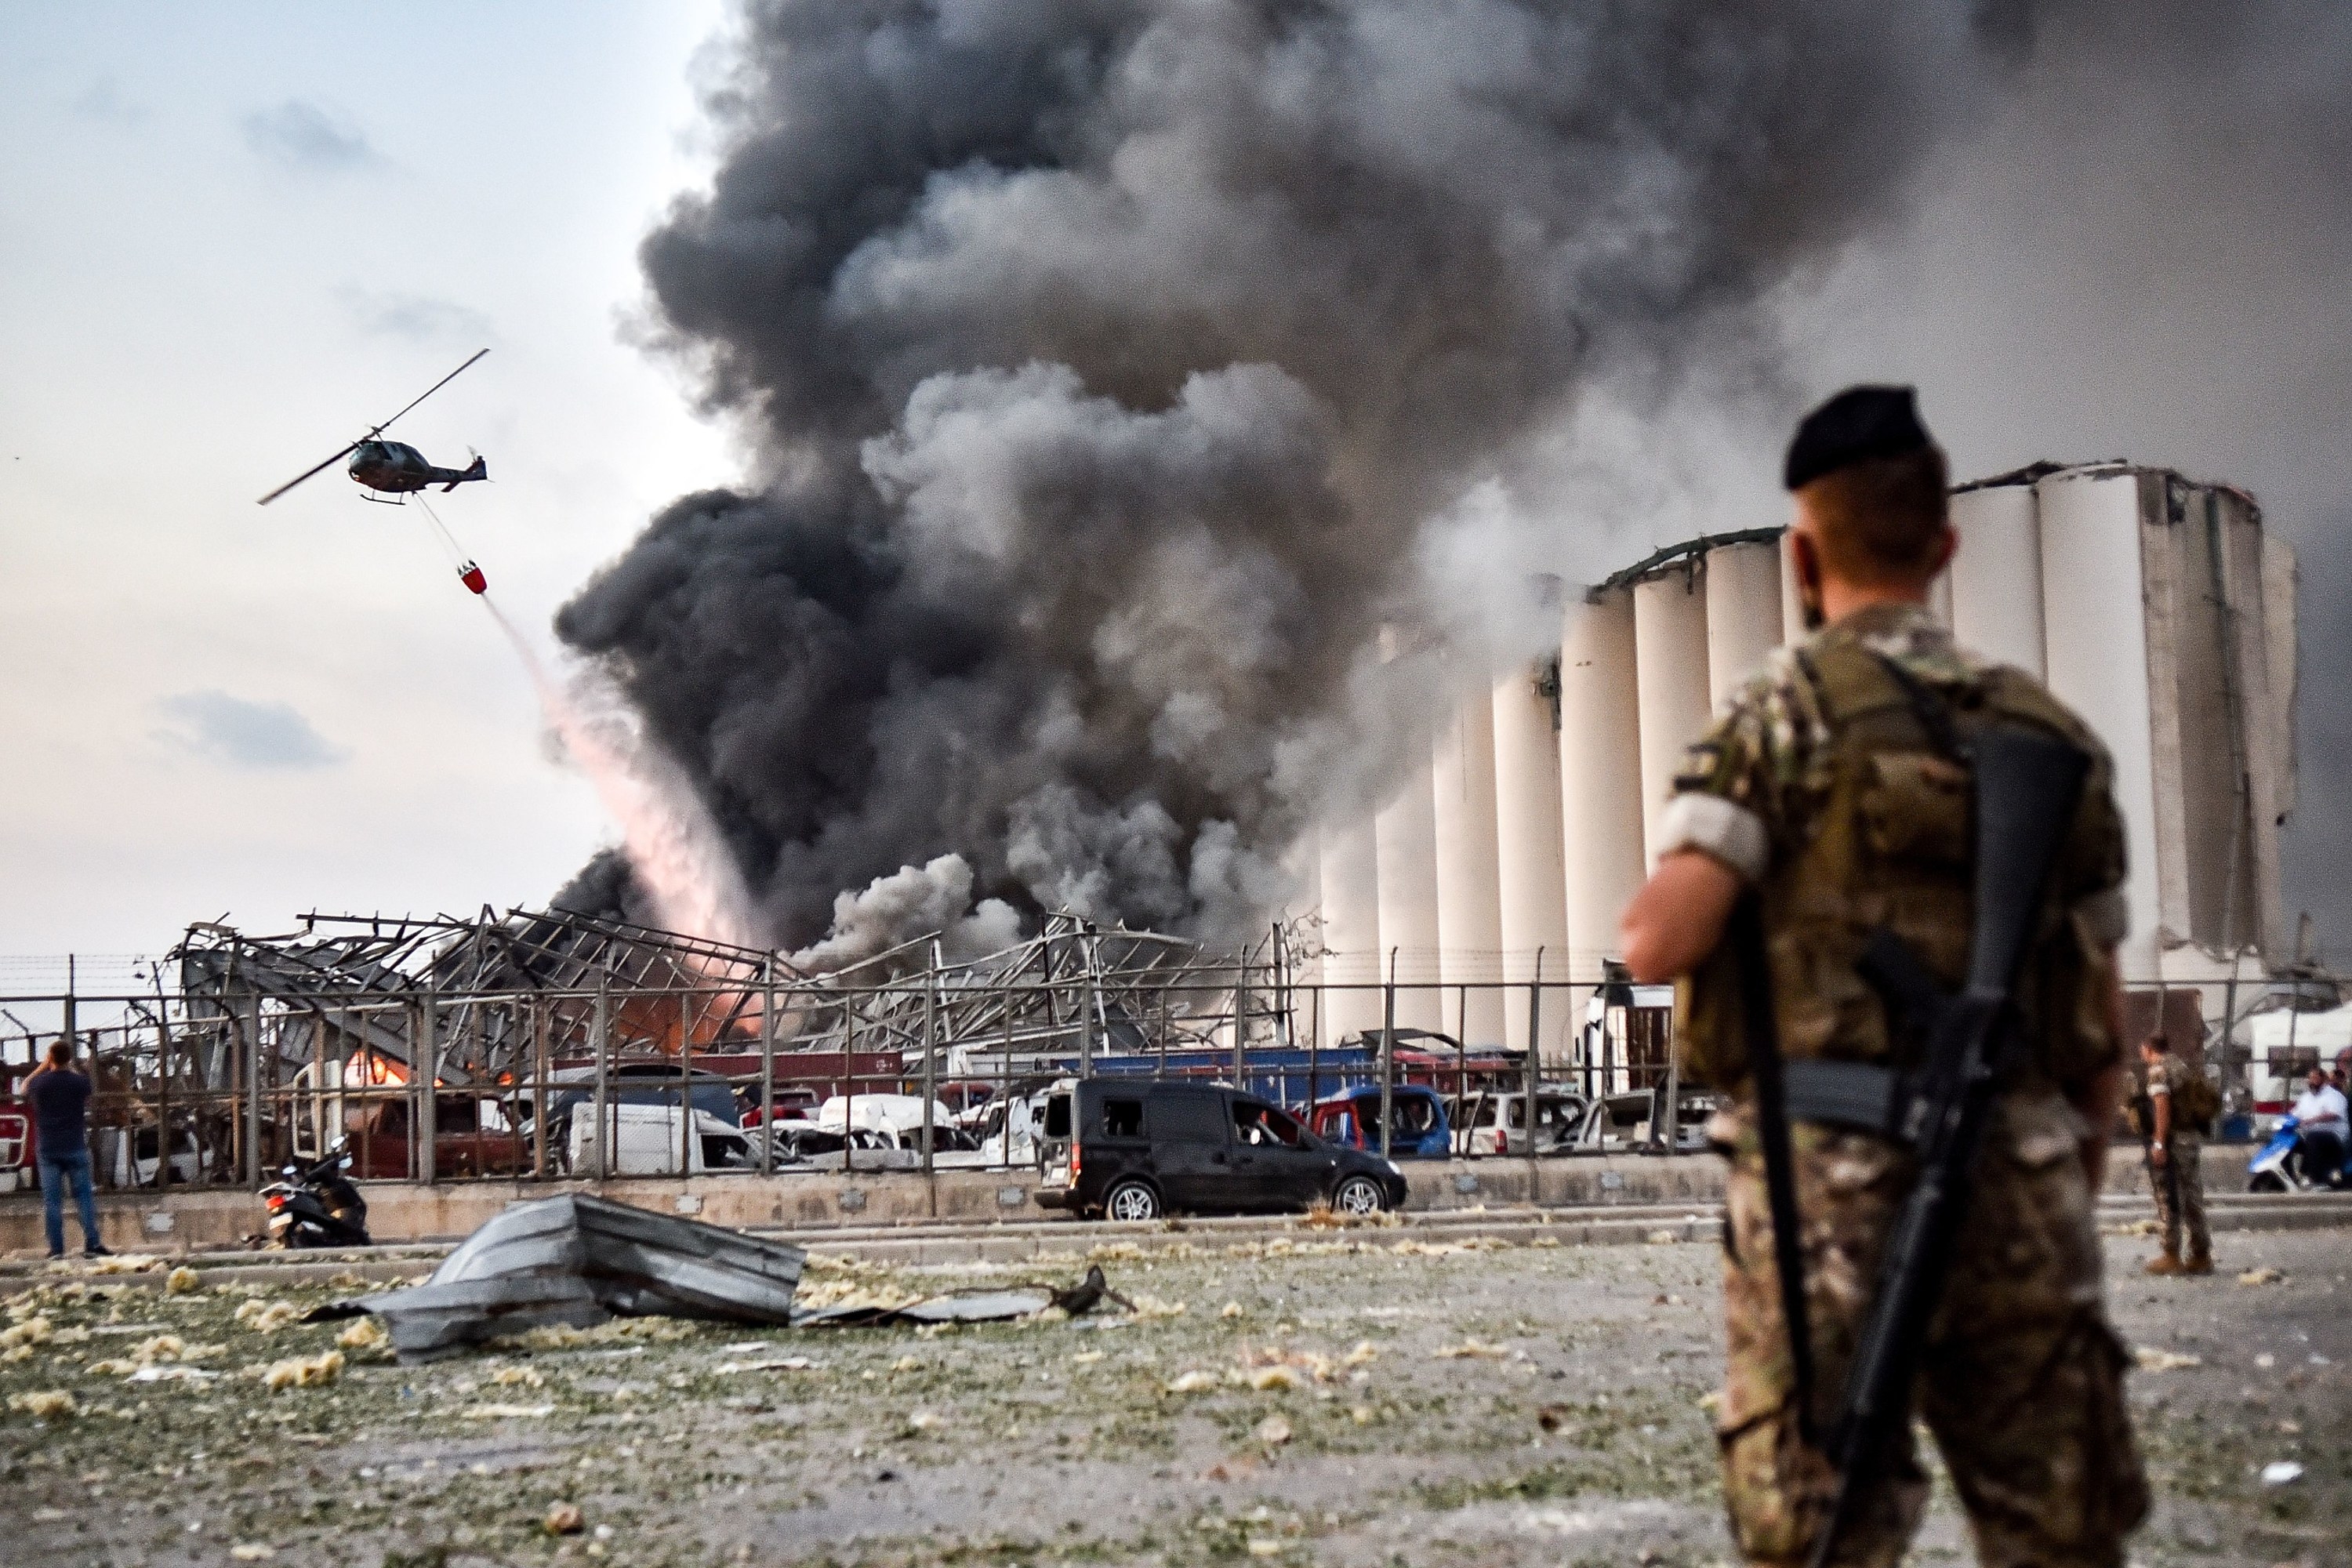 A helicopter douses flames and smoke next to a grain silo